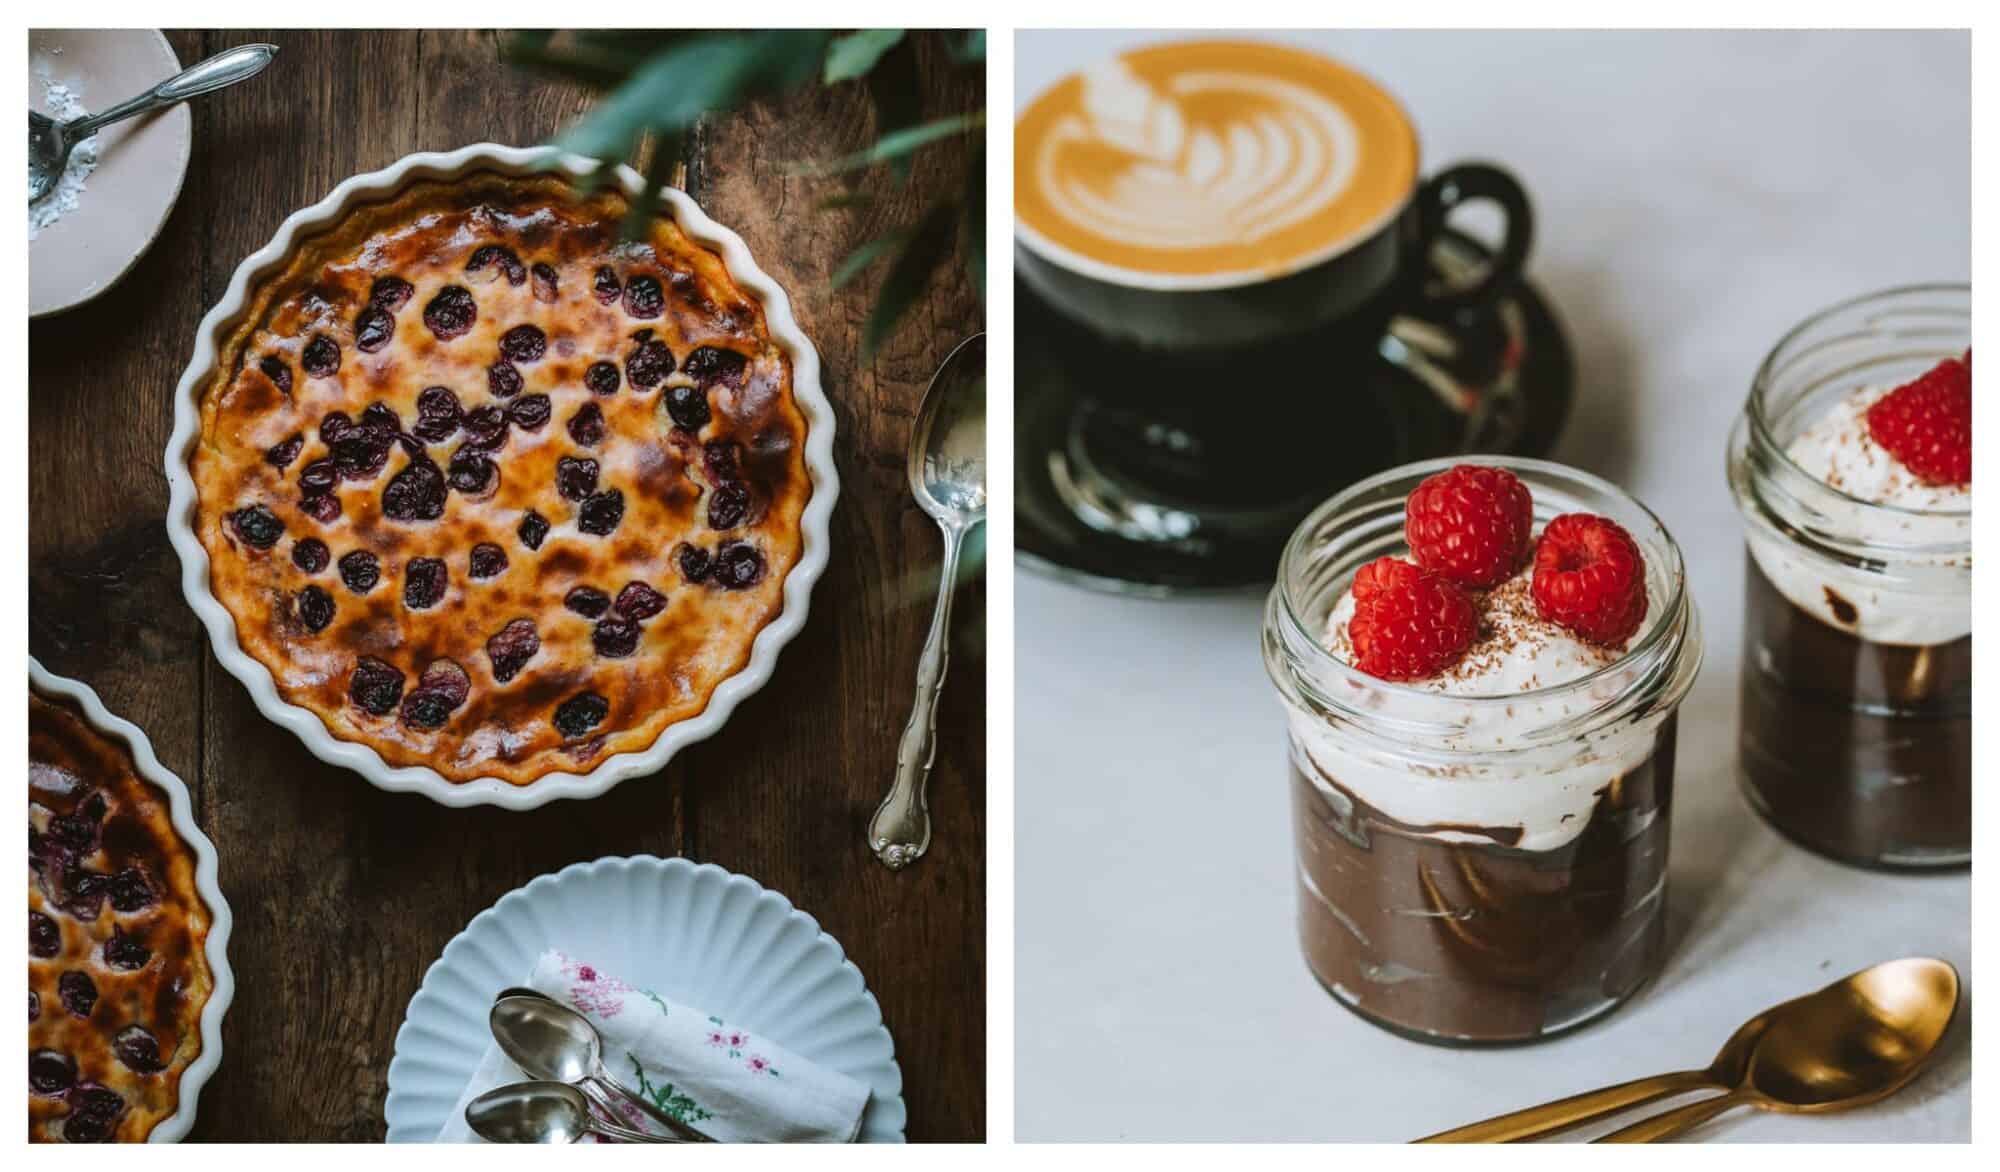 left: a cherry clafloutis in a white tarte pan sat on a wooden table; right: two ramekins of chocolate mousse (all recipes from Voilà Vegan) topped with vegan whipped cream and raspberries along side a cappuccino in a black cup and saucer. 